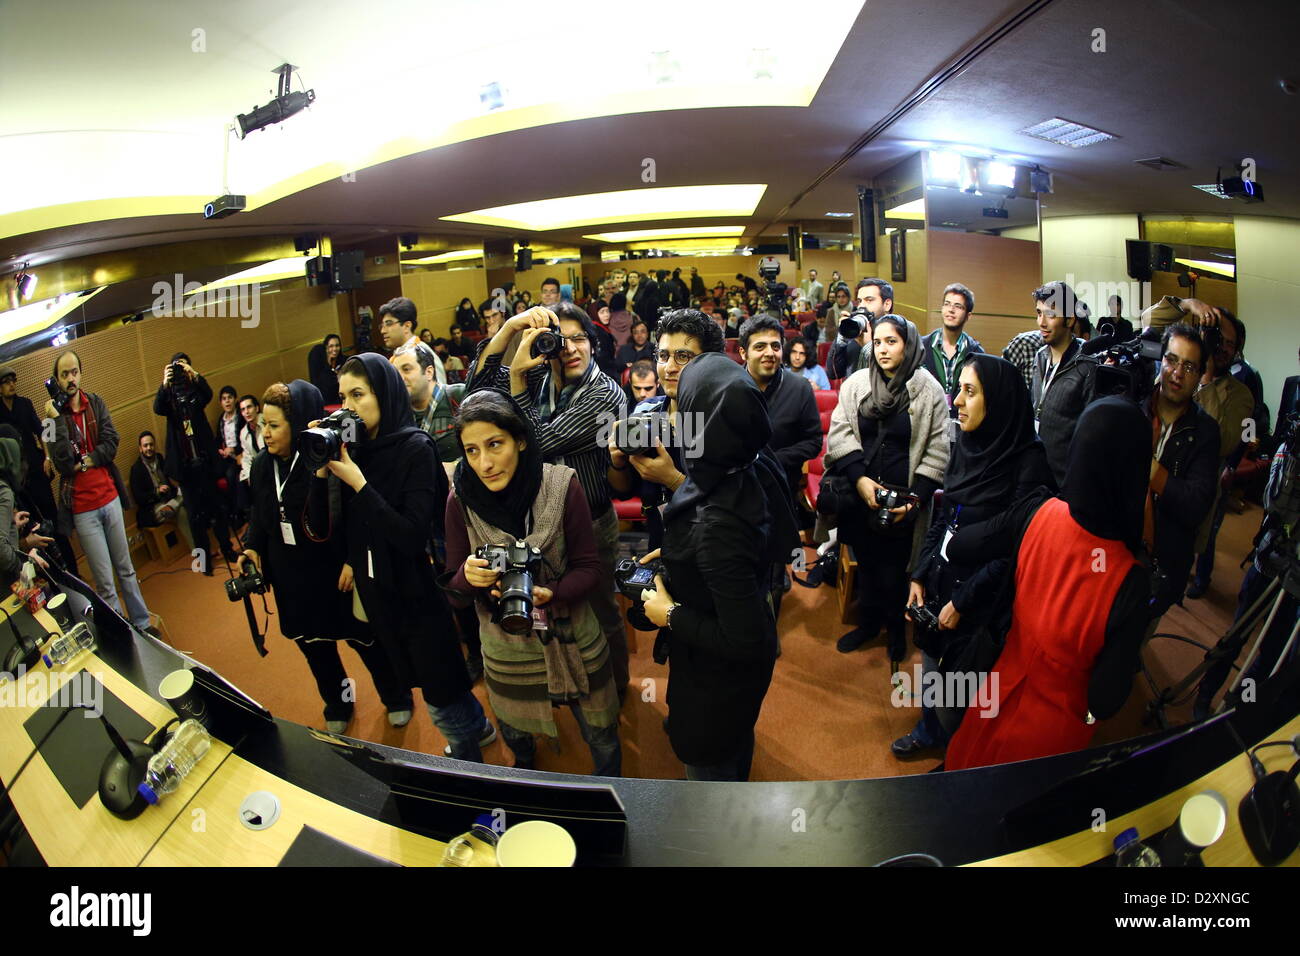 TEHRAN, IRAN: Photographers waiting for press conference at Day 2 of the 31th International Fajr Film Festival on February 1, 2013 in Tehran, Iran. Organized by the Ministry of Culture and Islamic Guidance, the Film Festival is the most important film event in the country. (Photo by Gallo Images / Amin Mohammed Jamali) Stock Photo